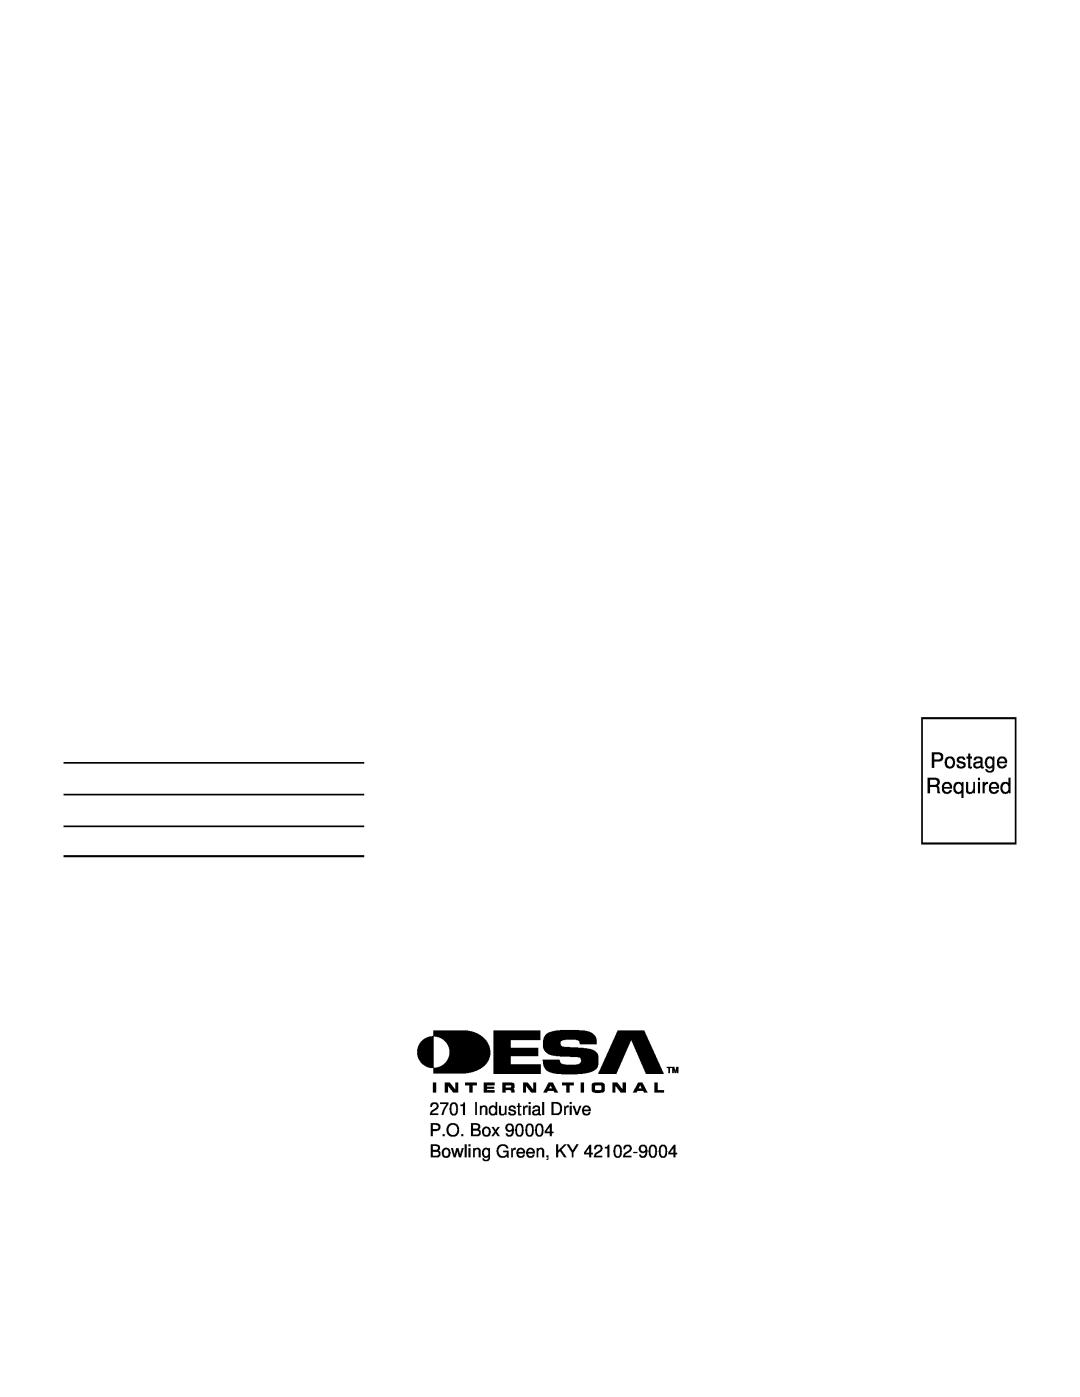 Desa VMH10TPB installation manual Postage Required, Industrial Drive P.O. Box Bowling Green, KY 